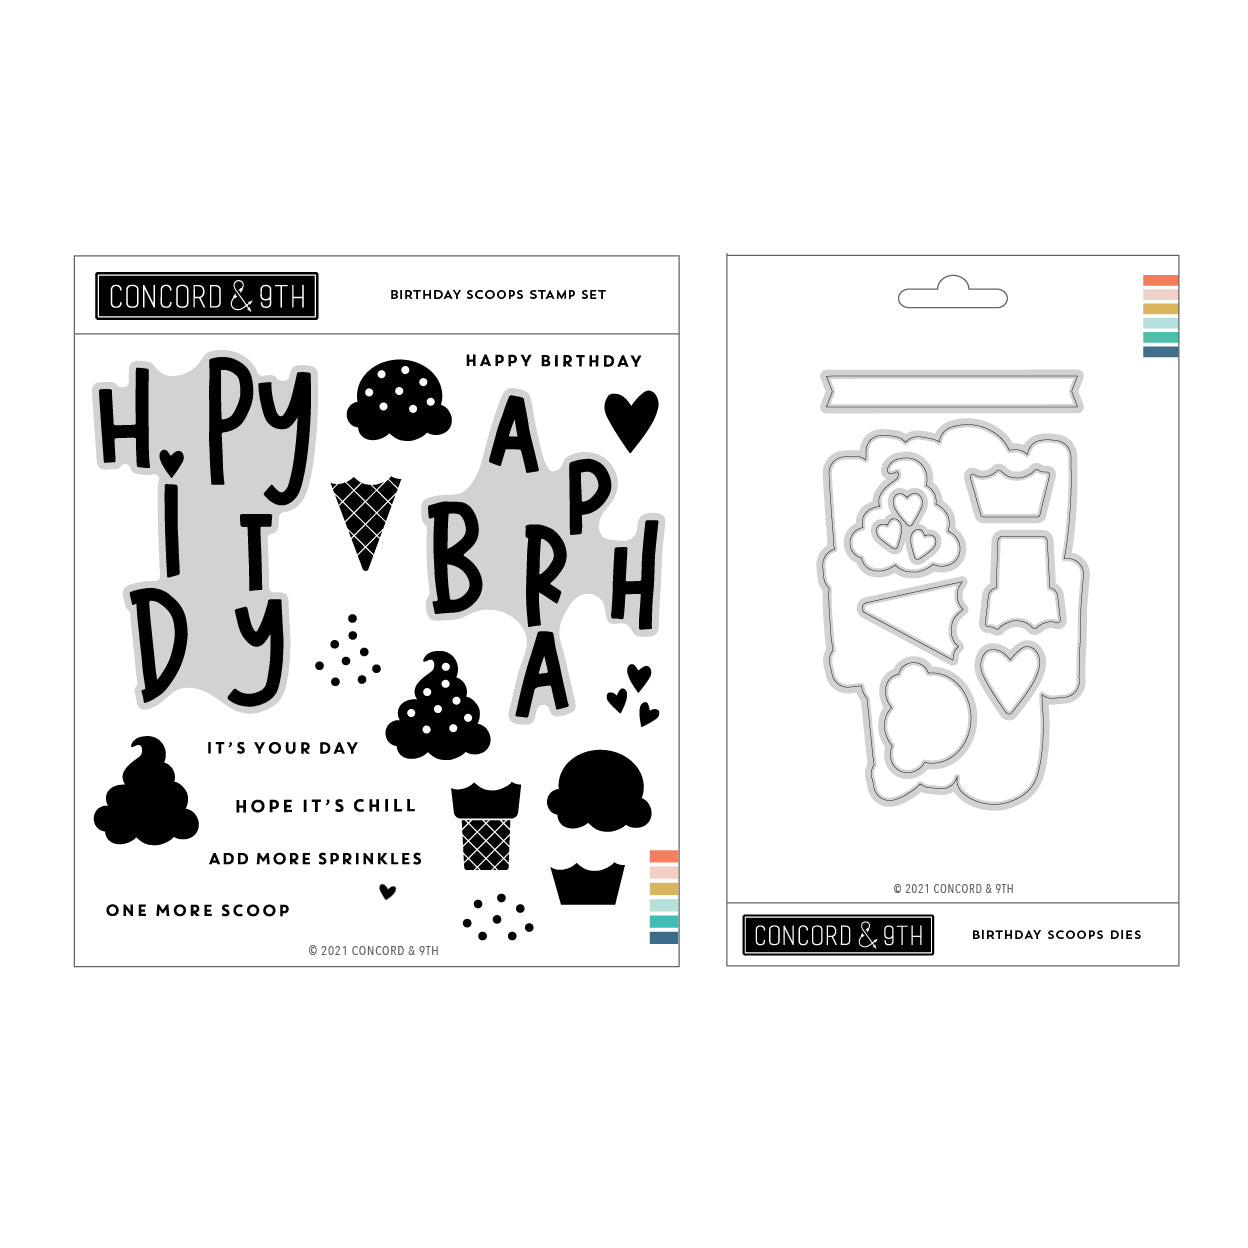 Birthday Scoops Stamp Set - Concord & 9th